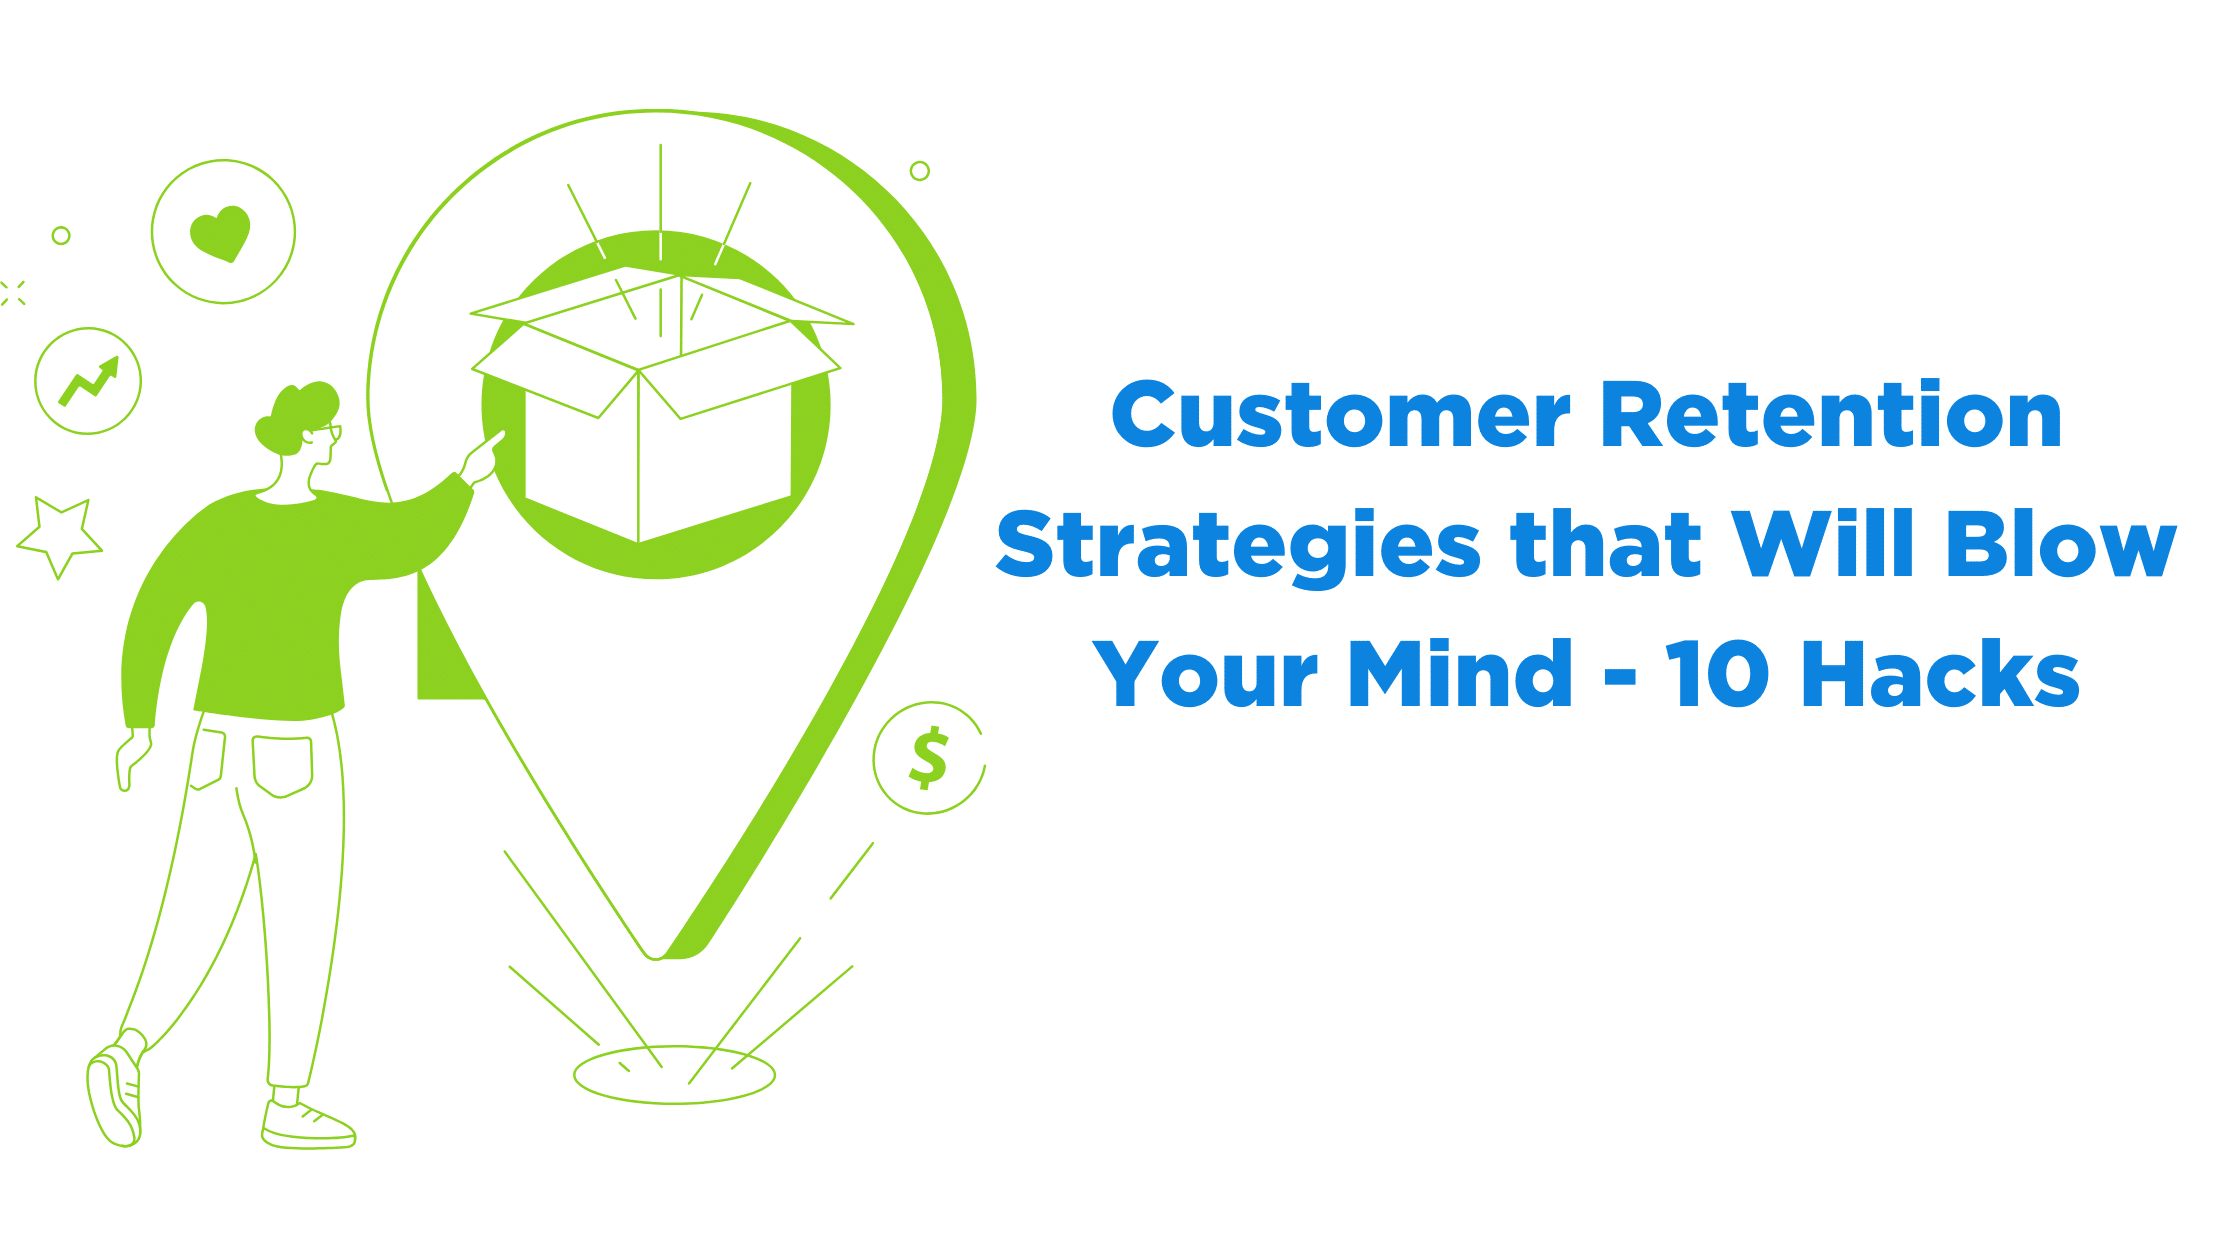 Customer Retention Strategies that Will Blow Your Mind - 10 Hacks